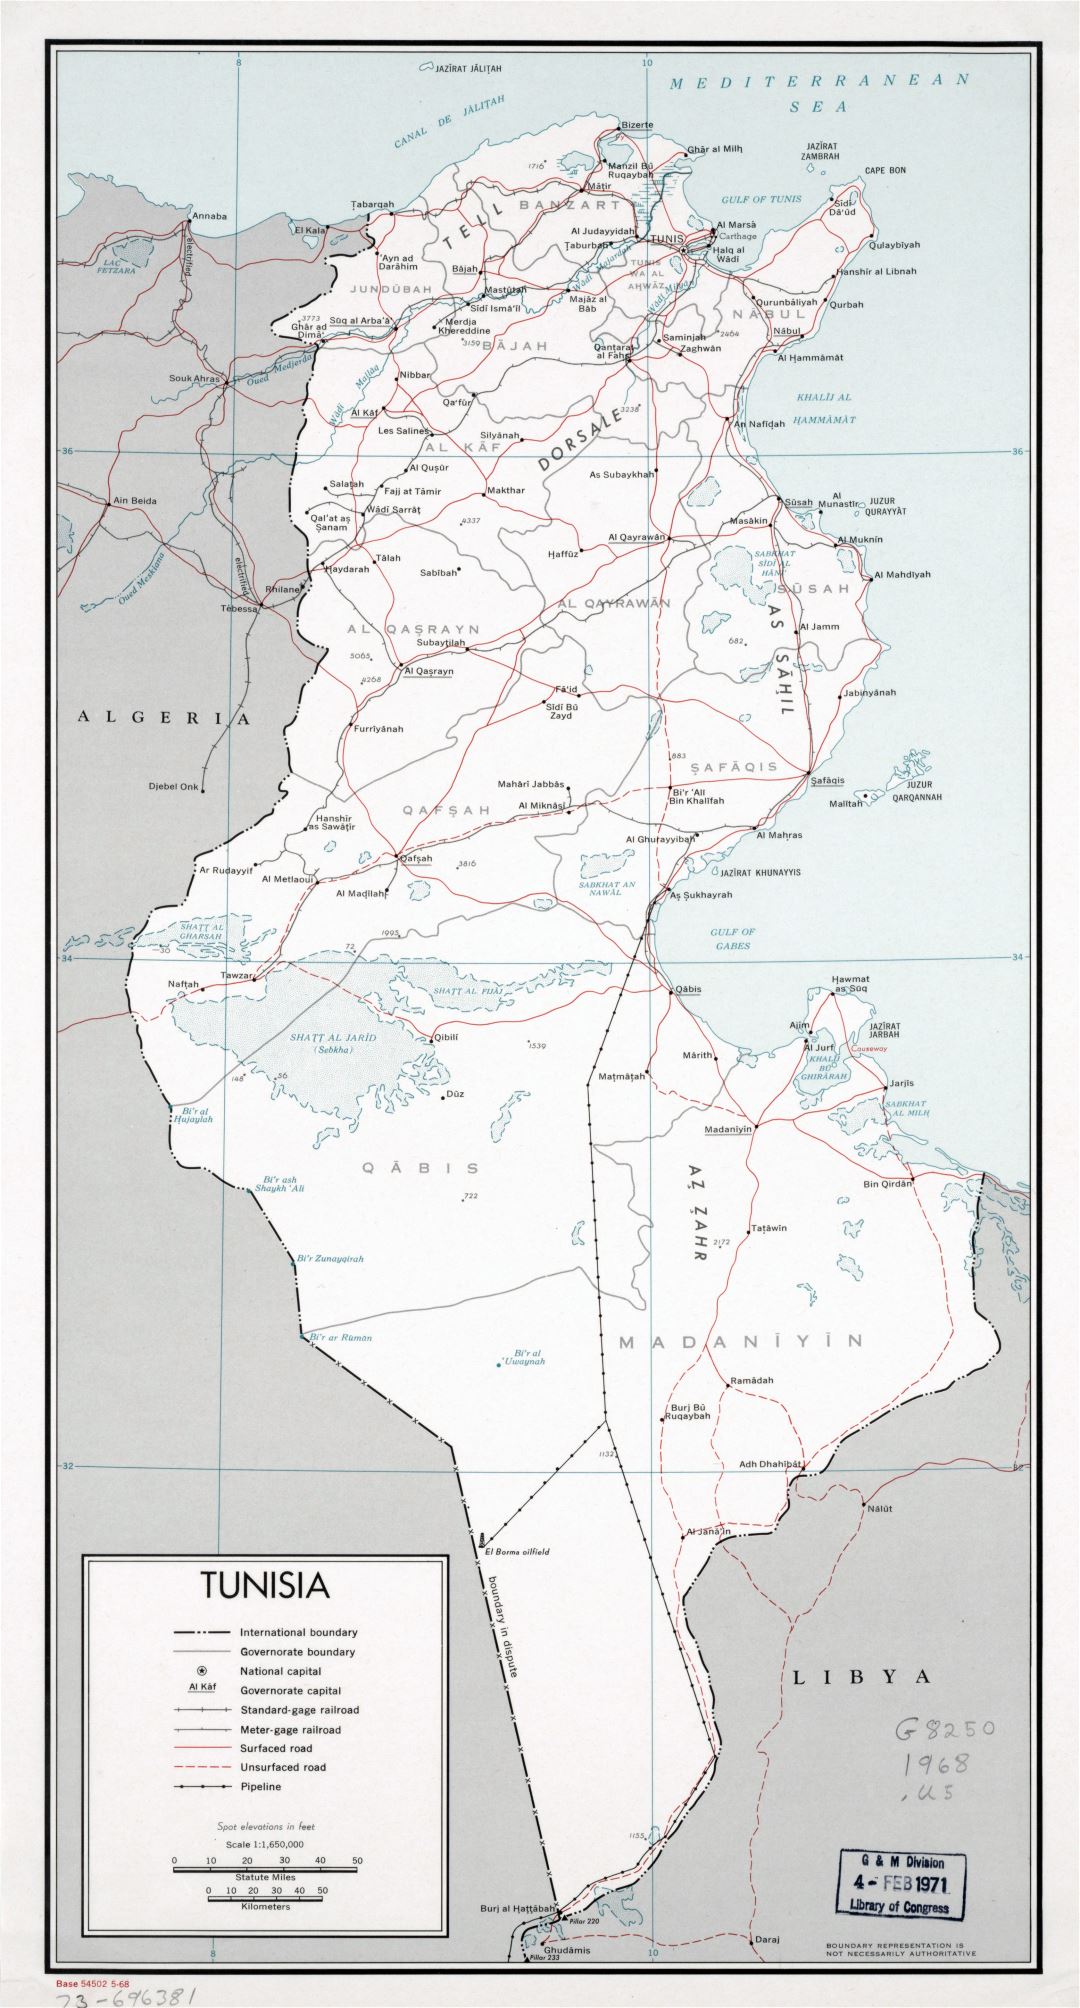 Large scale political and administrative map of Tunisia with roads, railroads, pipelines and major cities - 1968